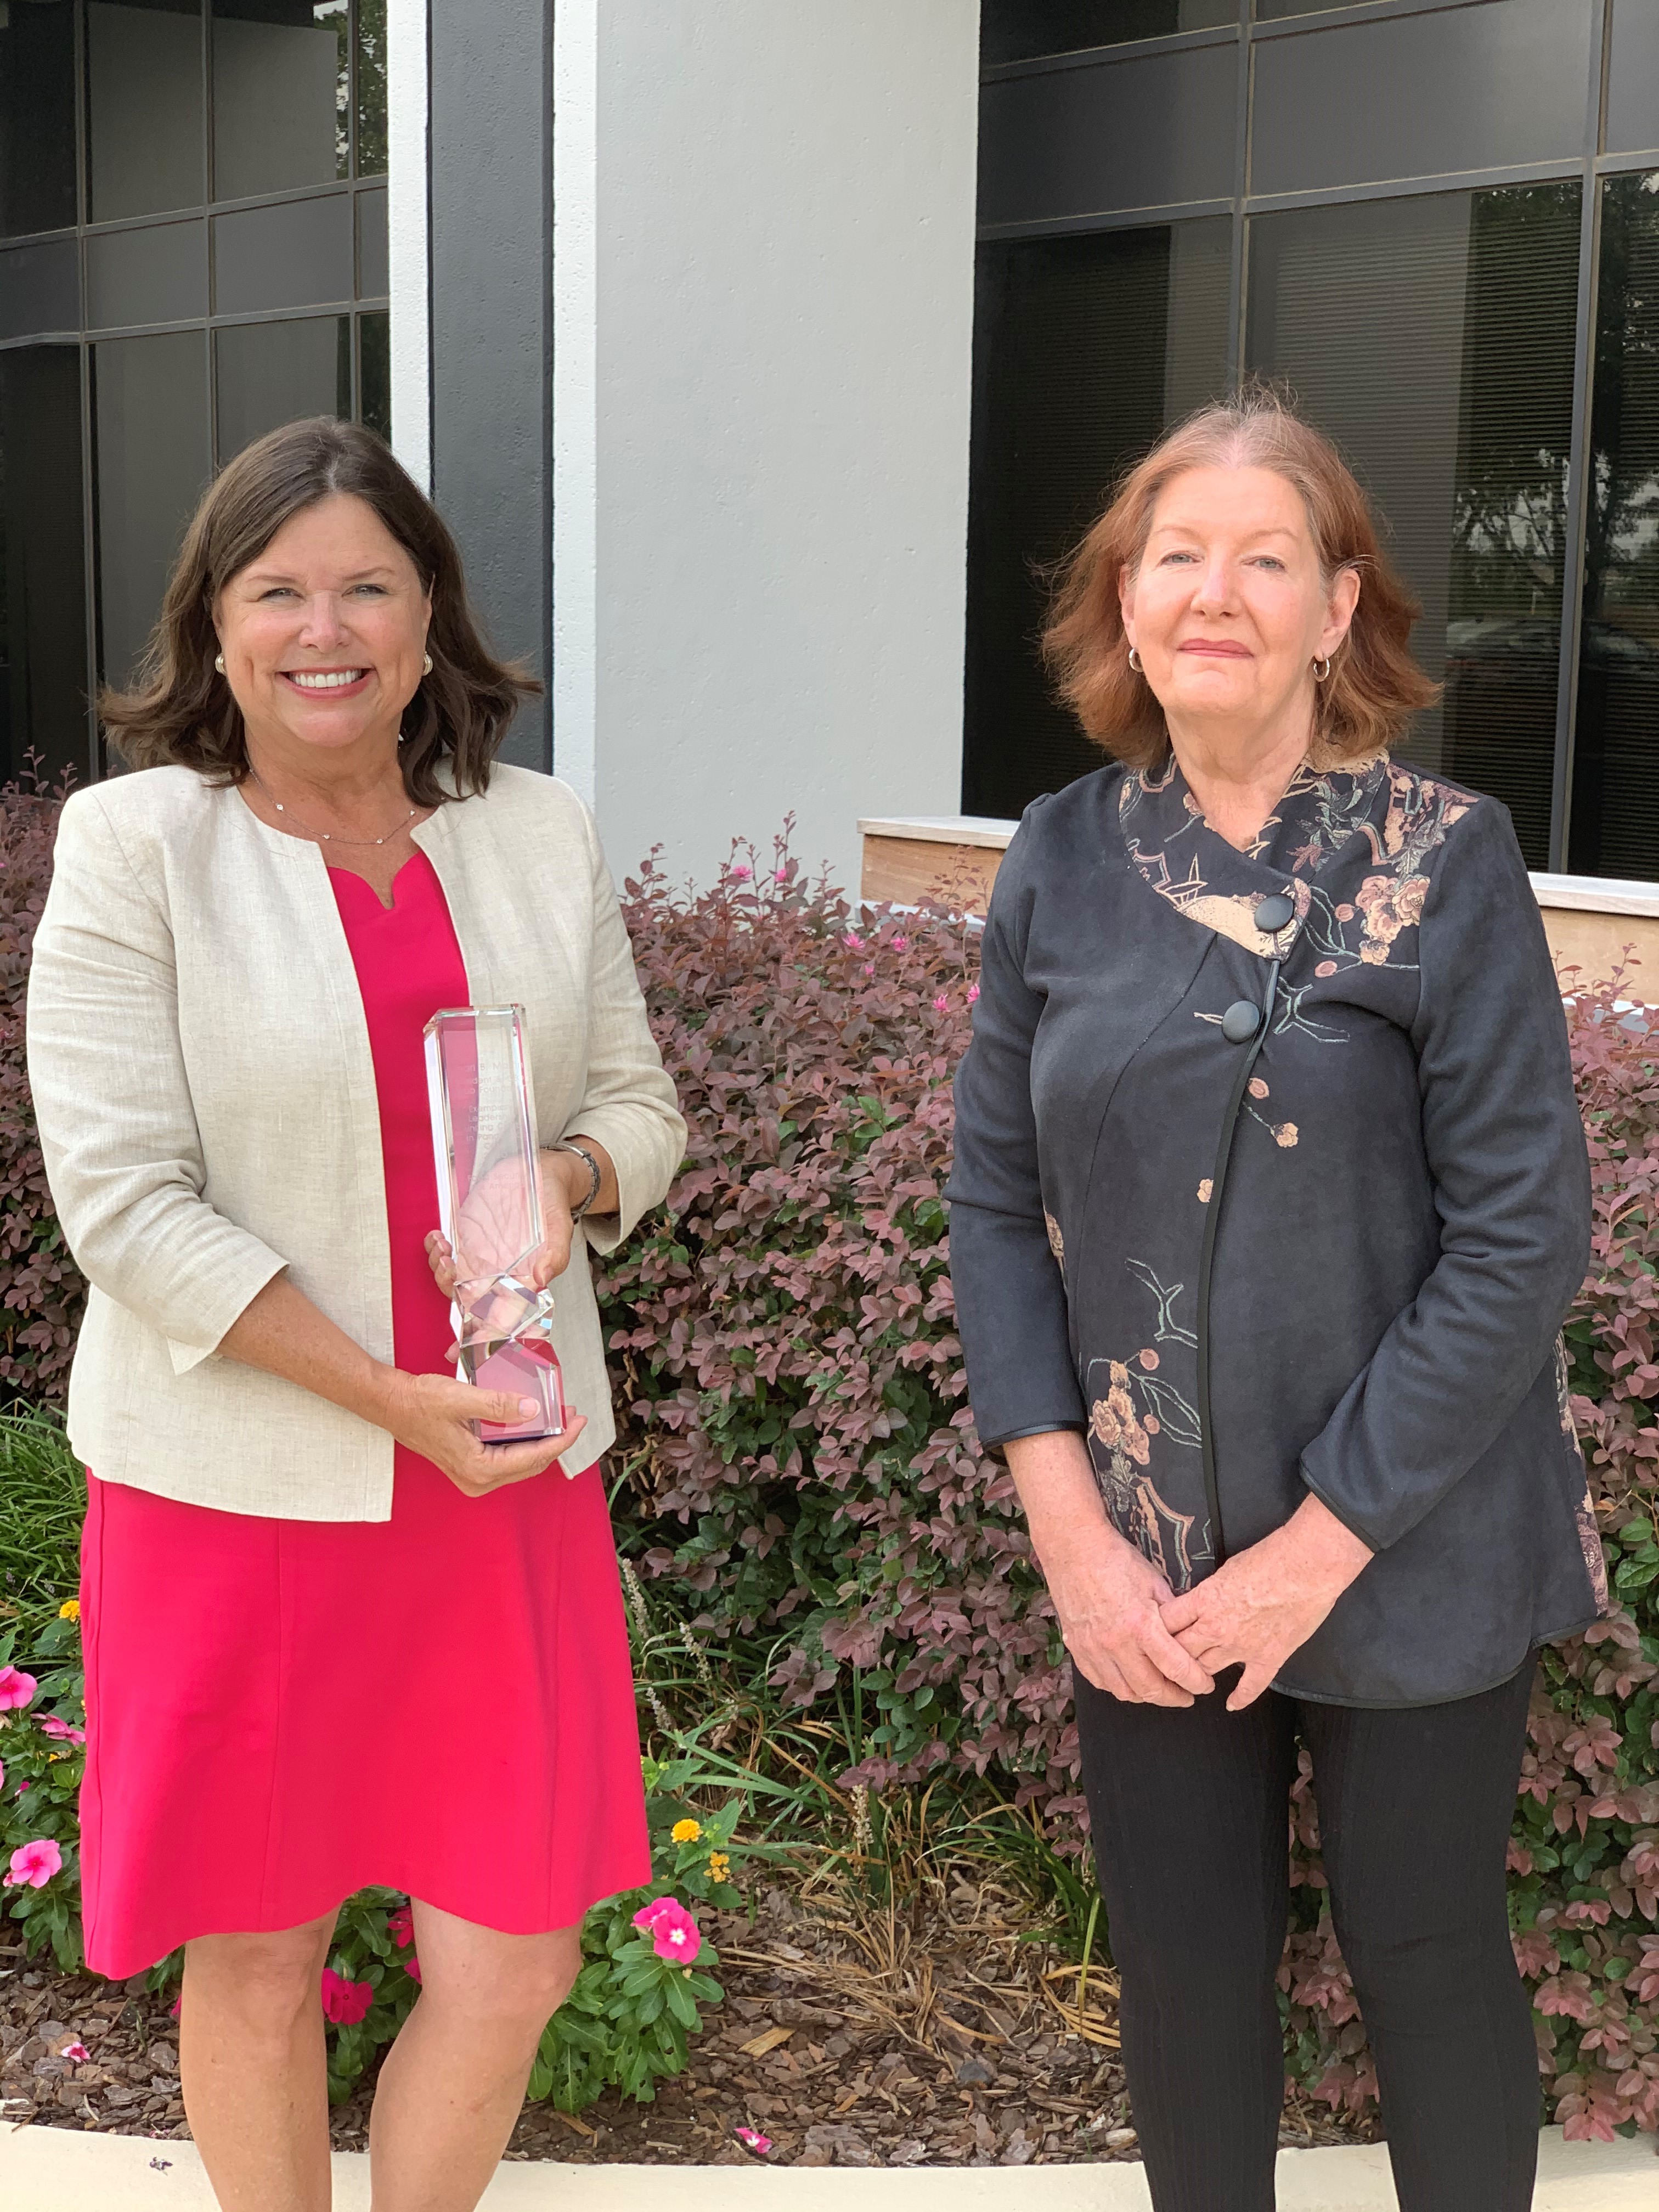 Pictured: Cobb Community Foundation President and CEO Shari Martin and Rev. Nancy Yarnell, Founder and CEO of Food Security for America.